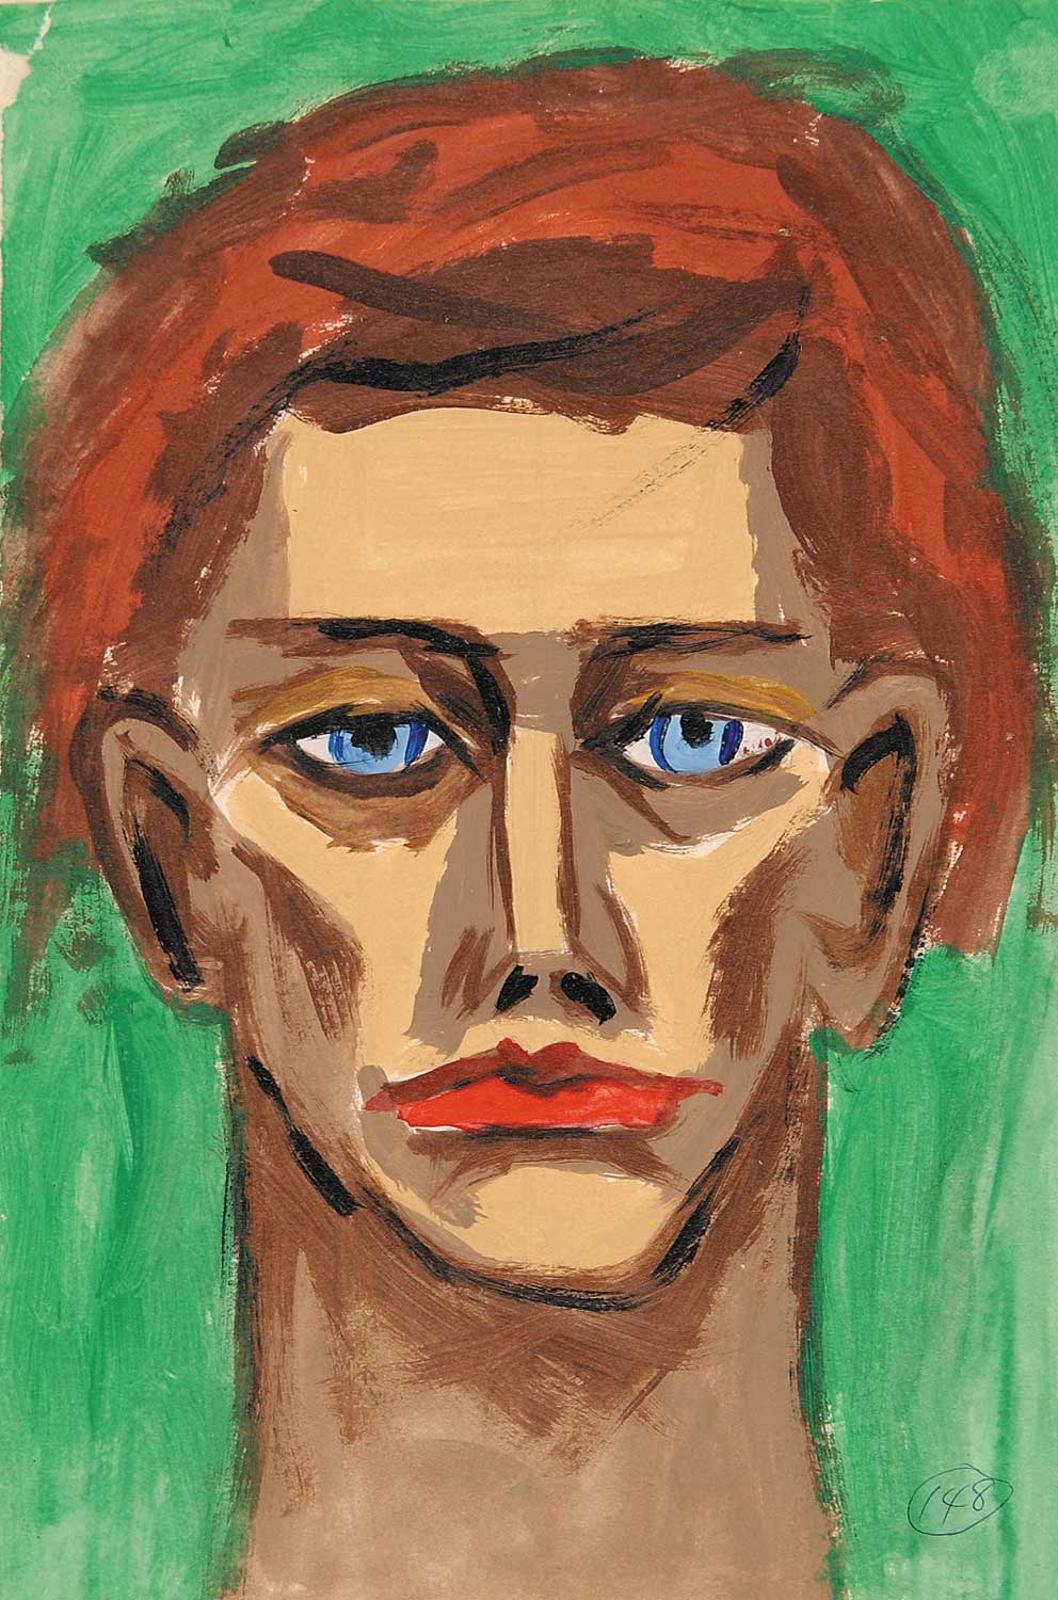 Robert Charles Aller (1922-2008) - Untitled - Boy with Red Hair on Green Background